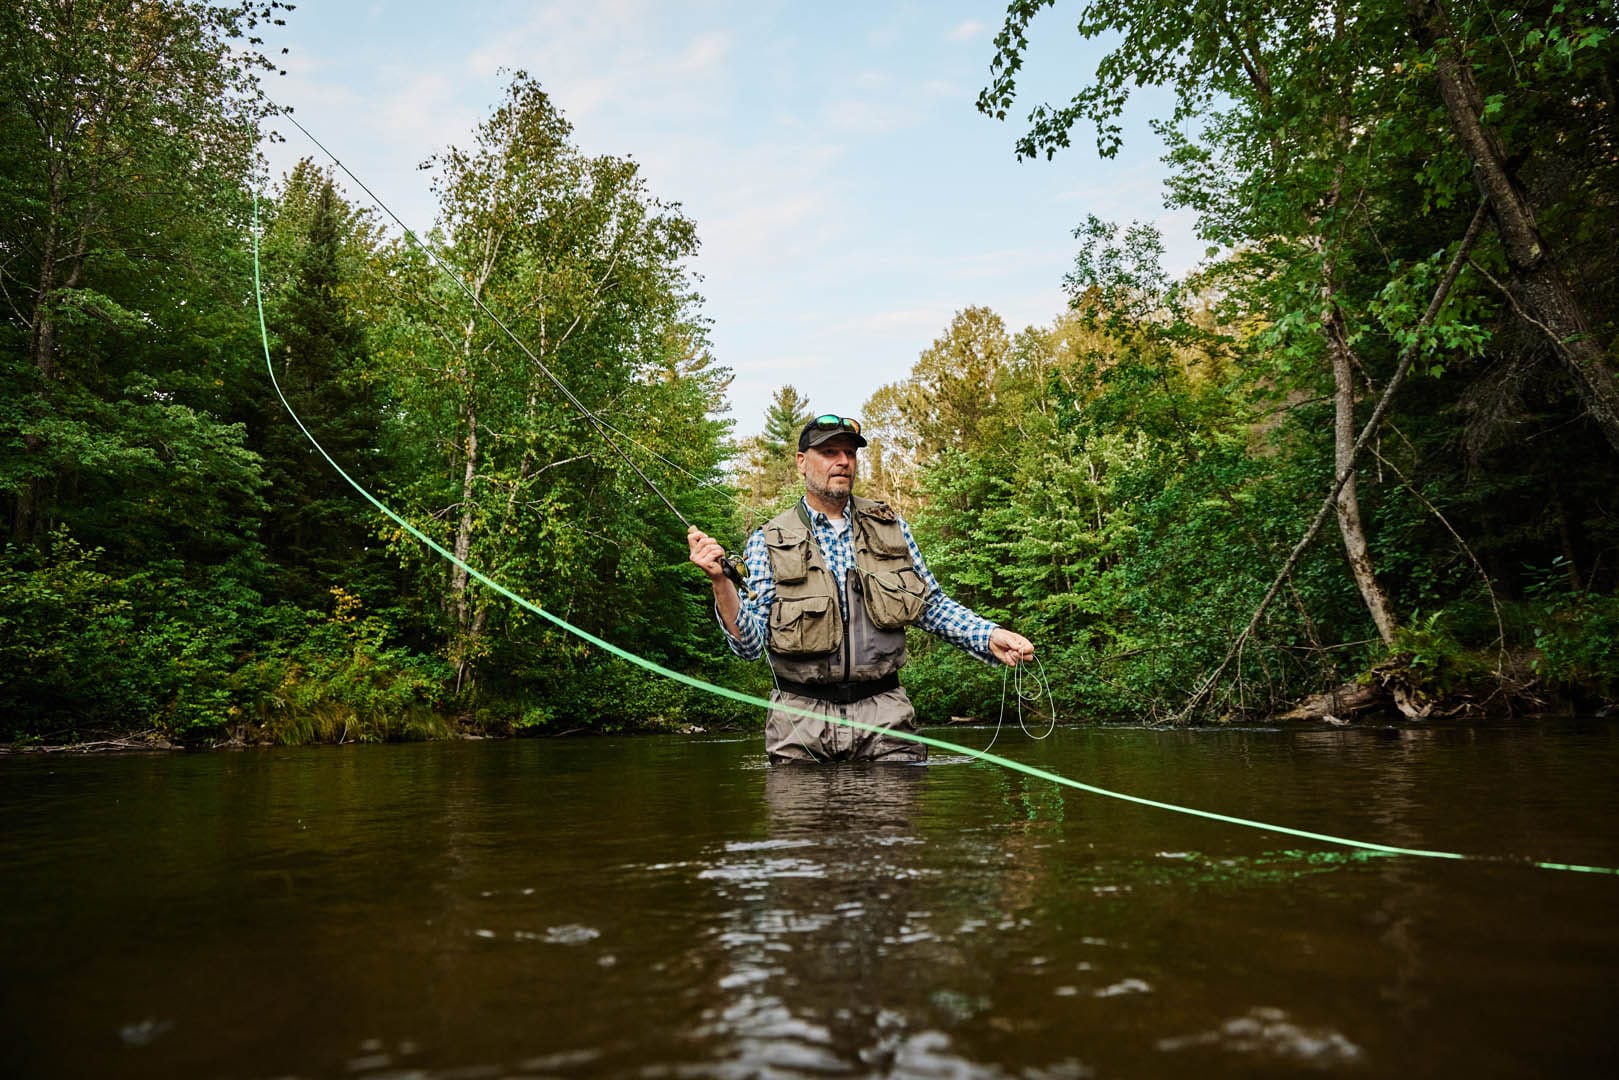 A man fly-fishing in a deep, dark river. He is wearing waders that allow him to be in the water without getting wet. The water is at his groin level. The trees along the river are bright green.